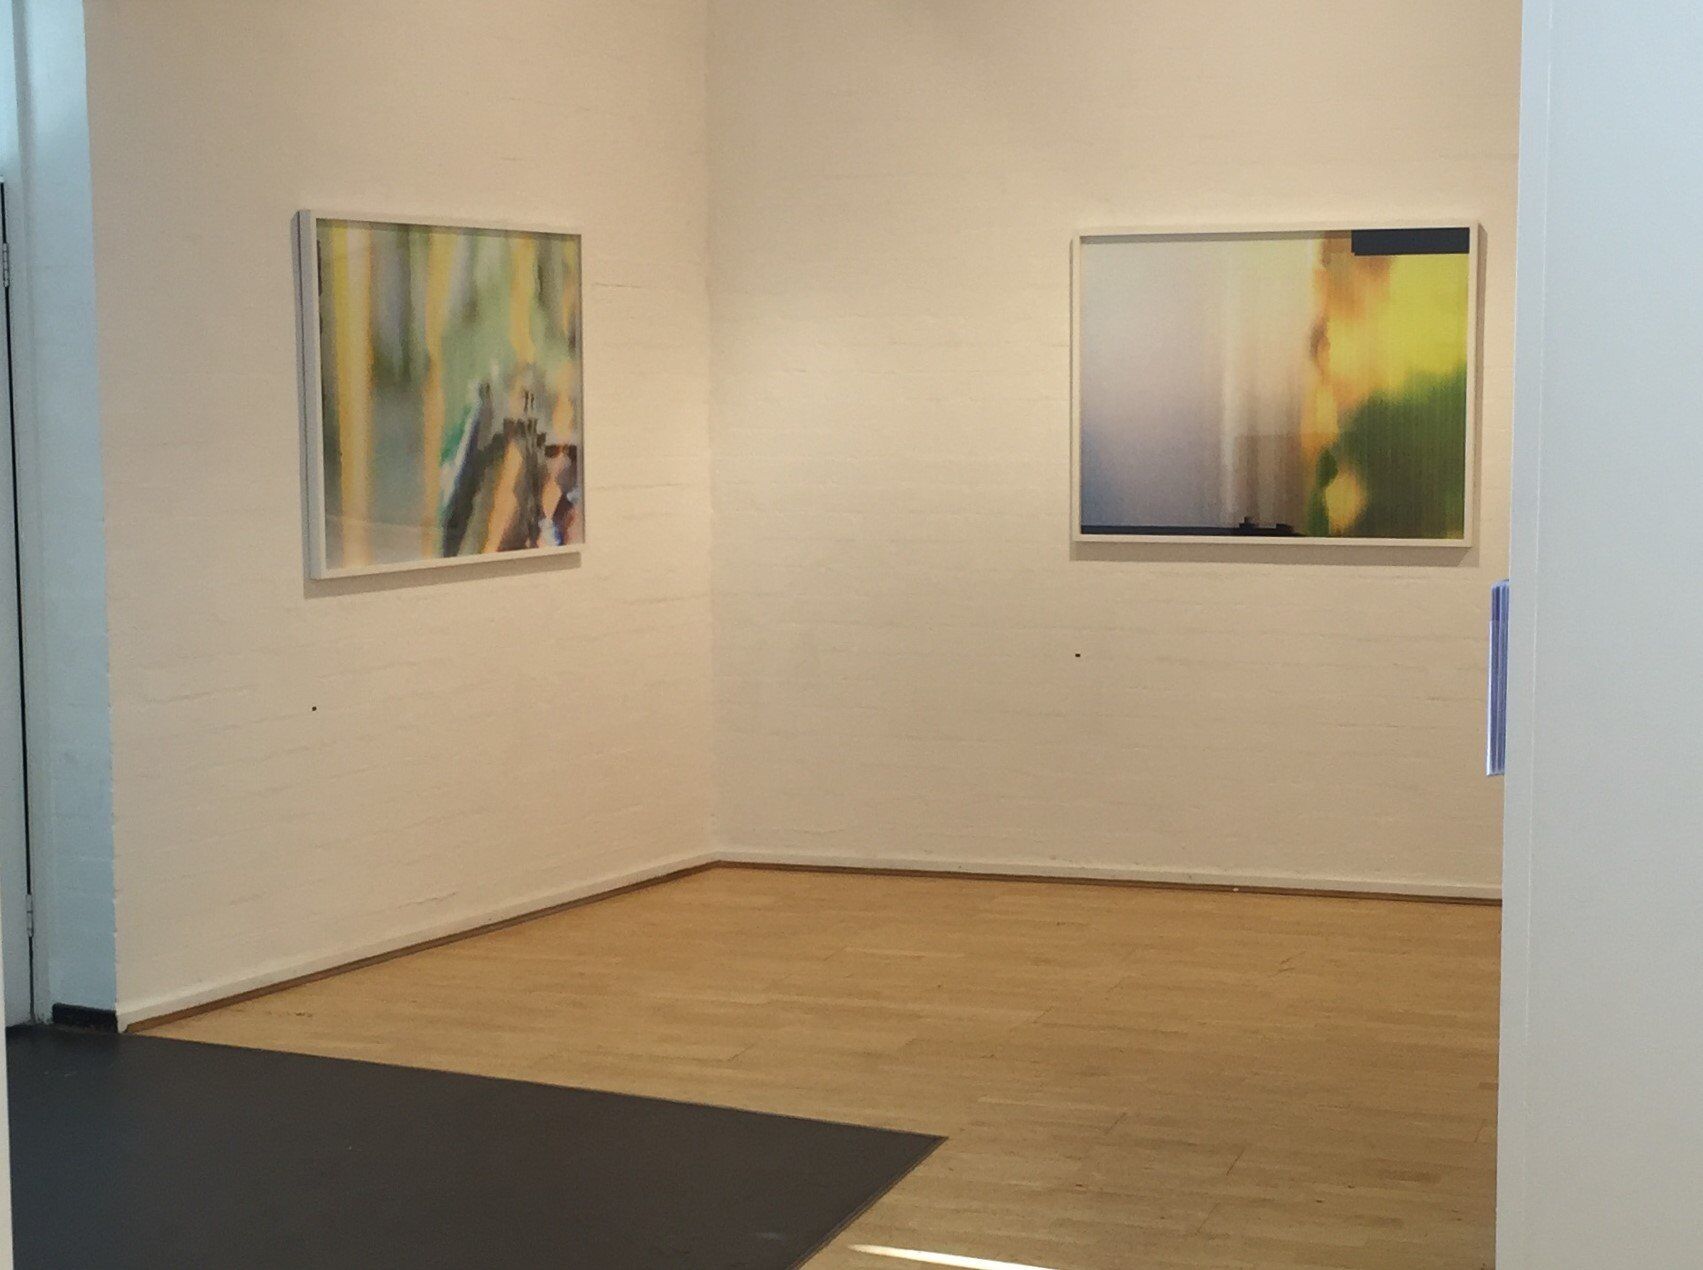 Installation view - PhotoAccess Gallery, Canberra - May,2018